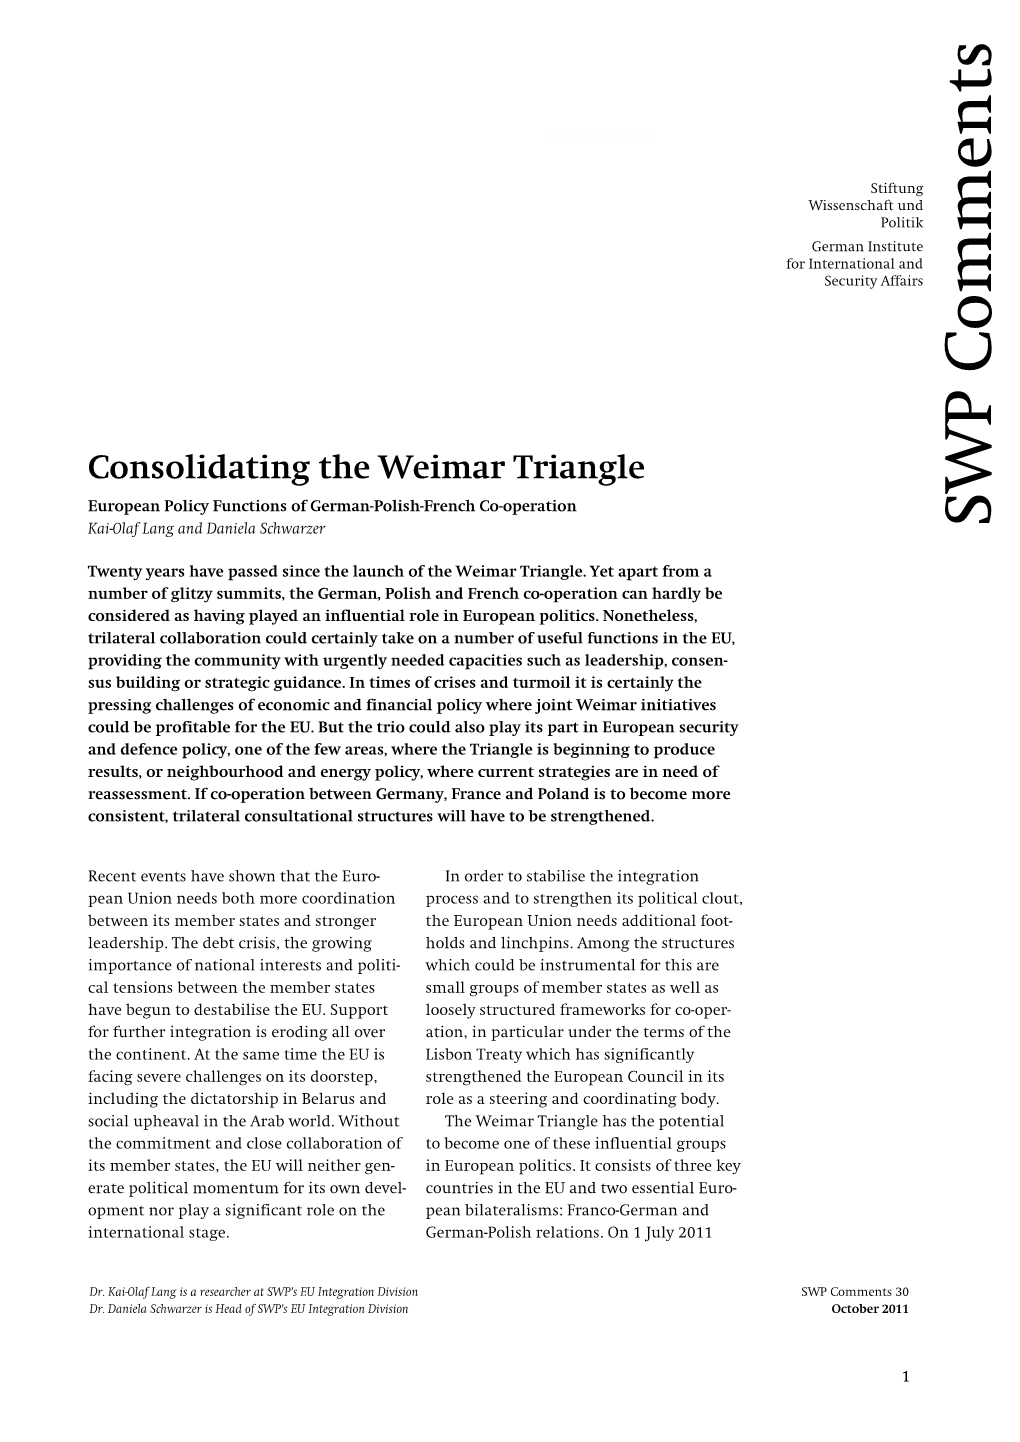 Consolidating the Weimar Triangle European Policy Functions of German-Polish-French Co-Operation